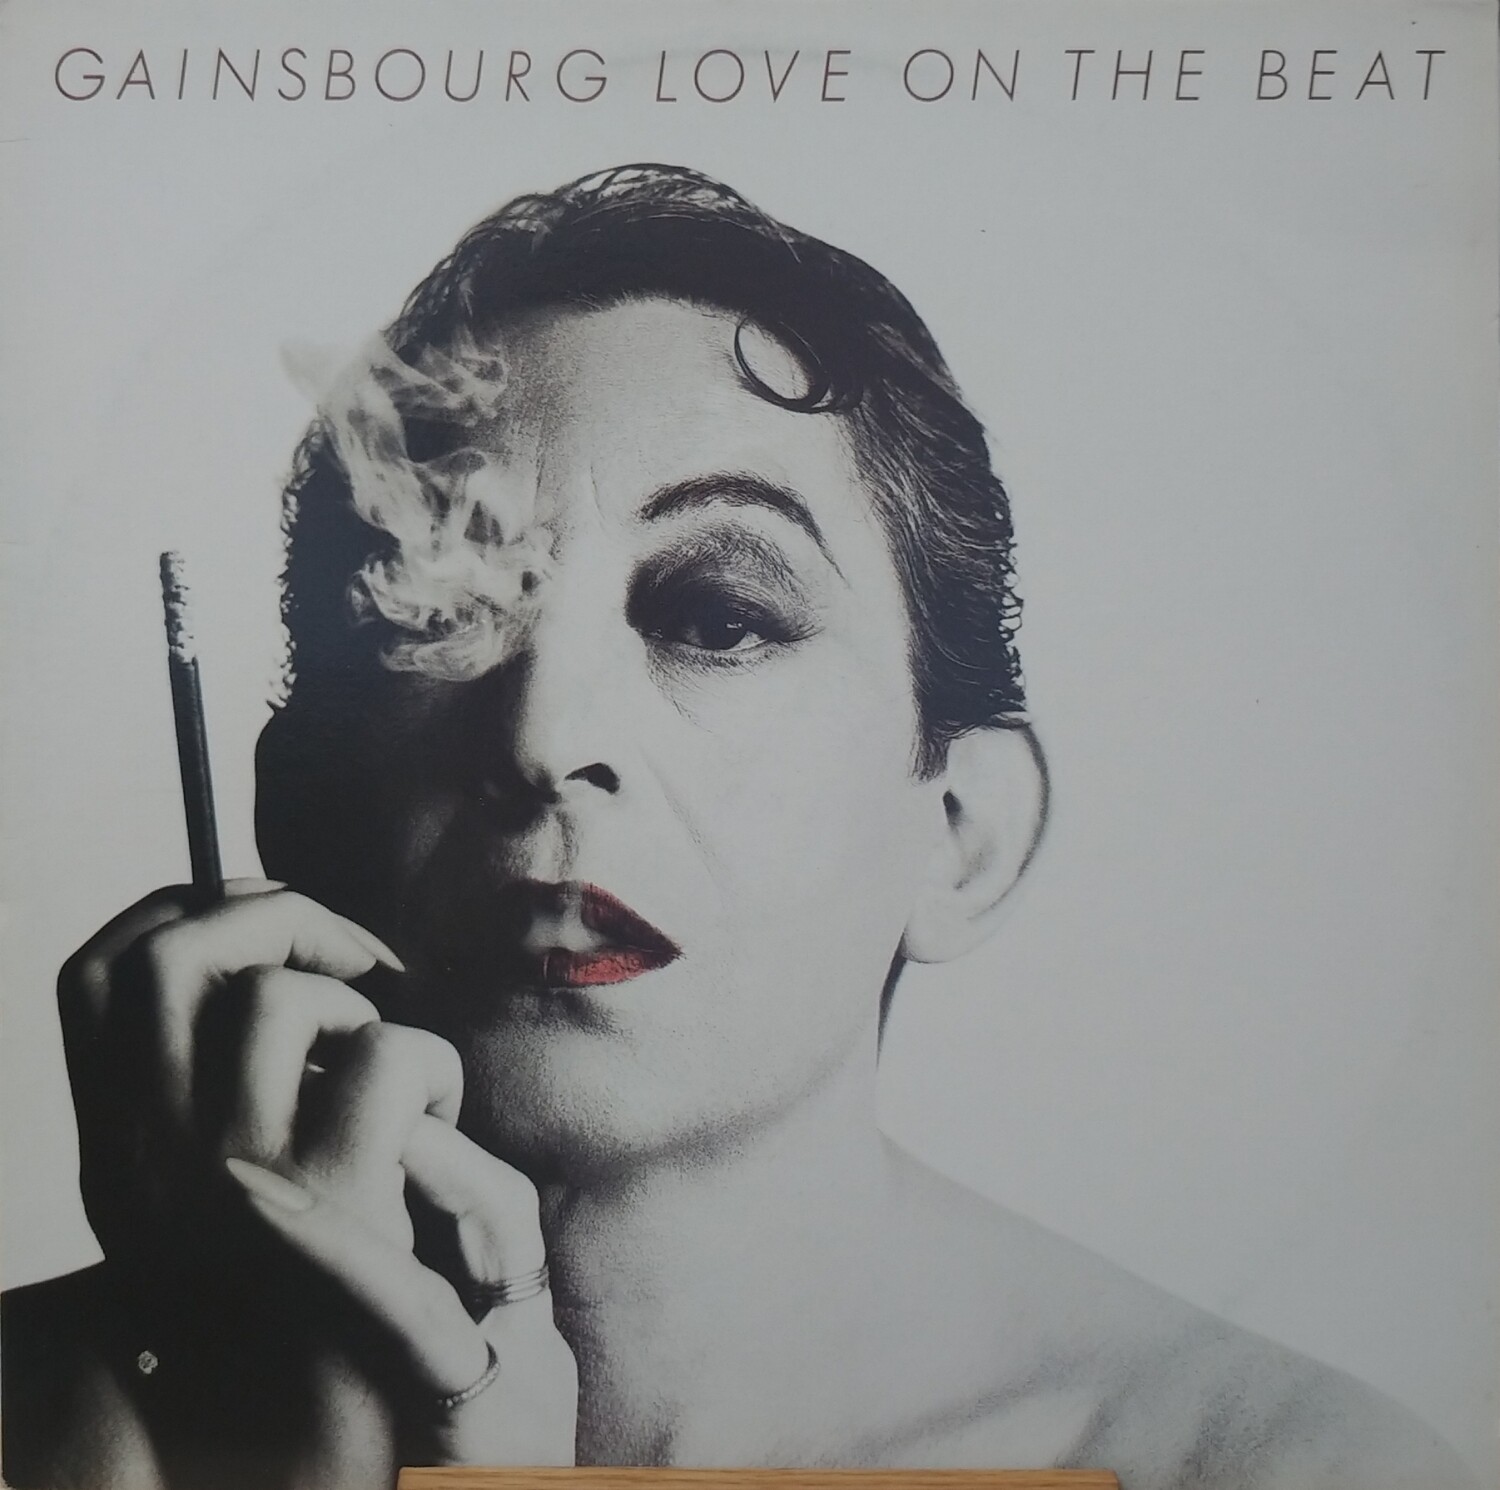 Serge Gainsbourg - Love on the beat